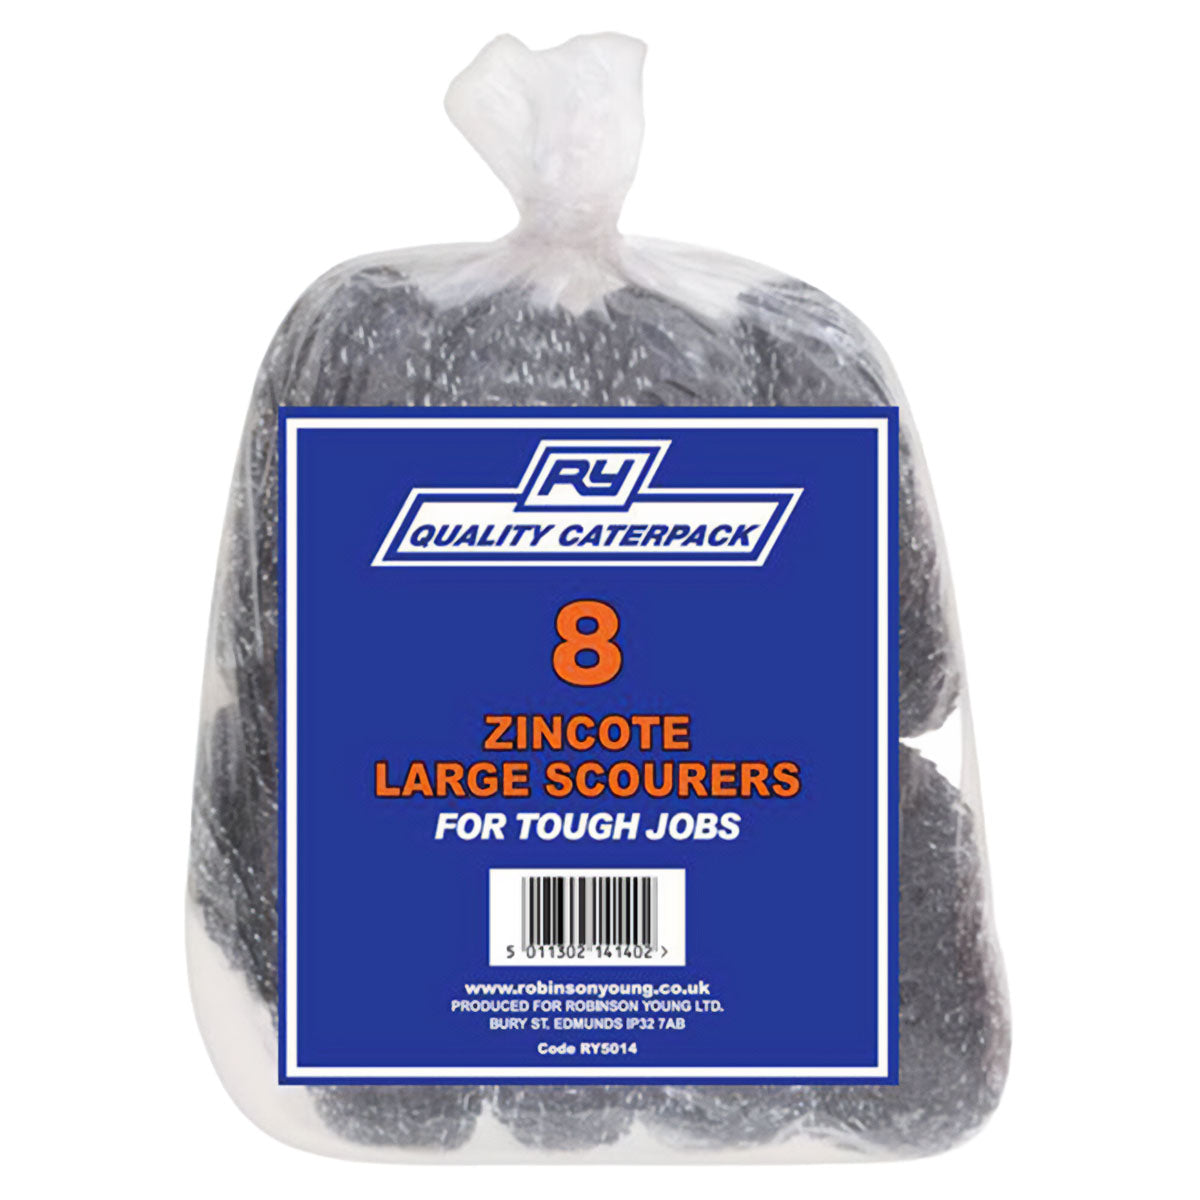 A bag of RY - Zinocote Large Scourers - 8 Pack from Continental Food Store.